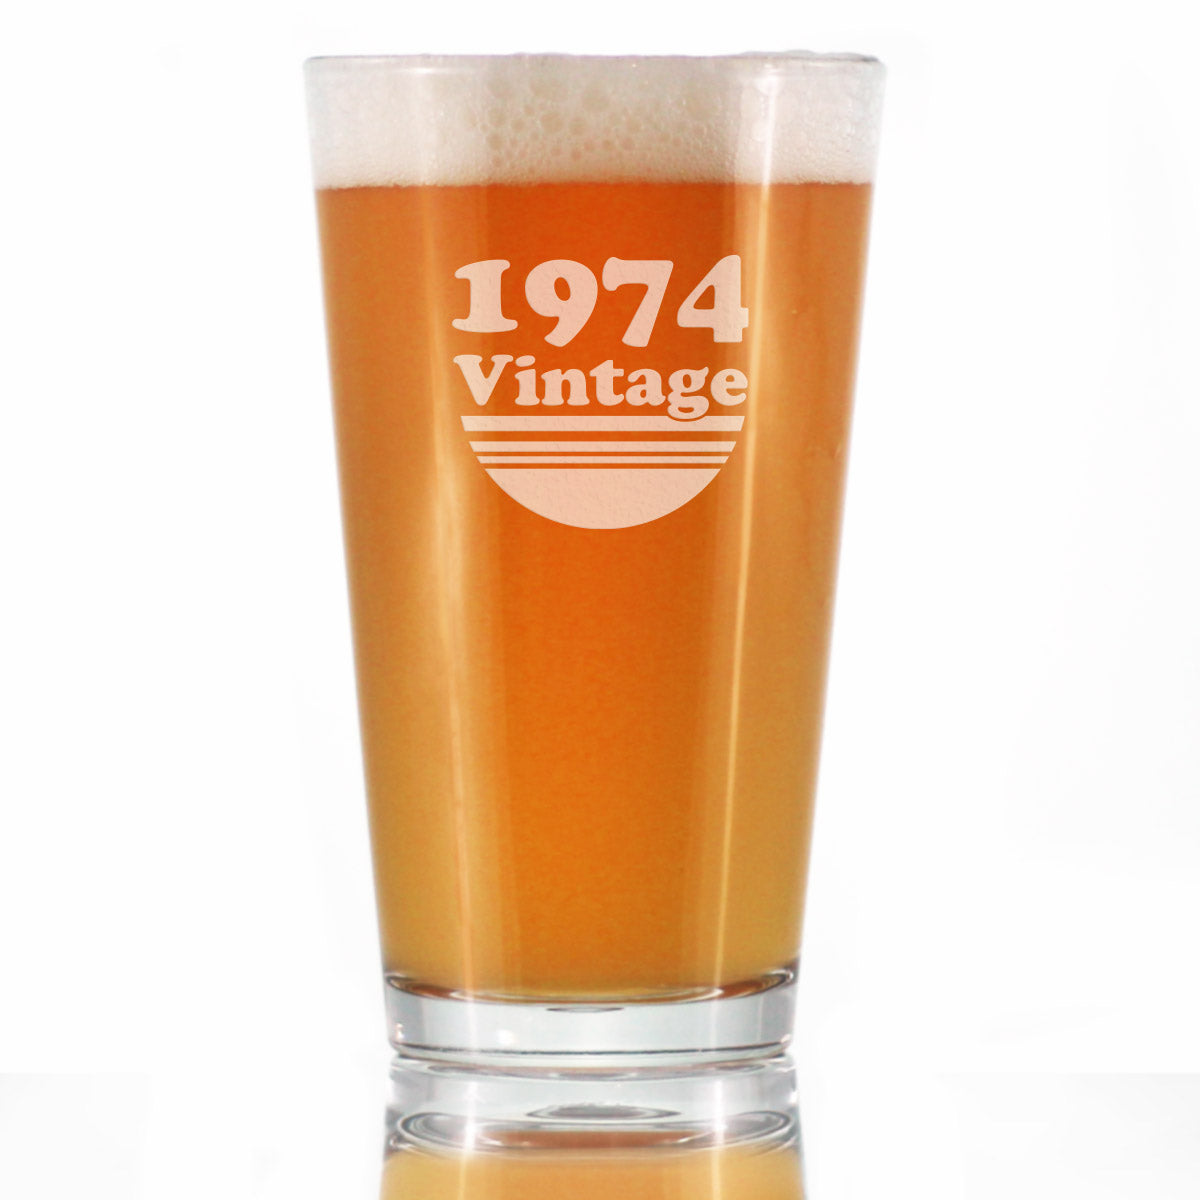 Vintage 1974 - Pint Glass for Beer - 50th Birthday Gifts for Men or Women Turning 50 - Fun Bday Party Decor - 16 oz